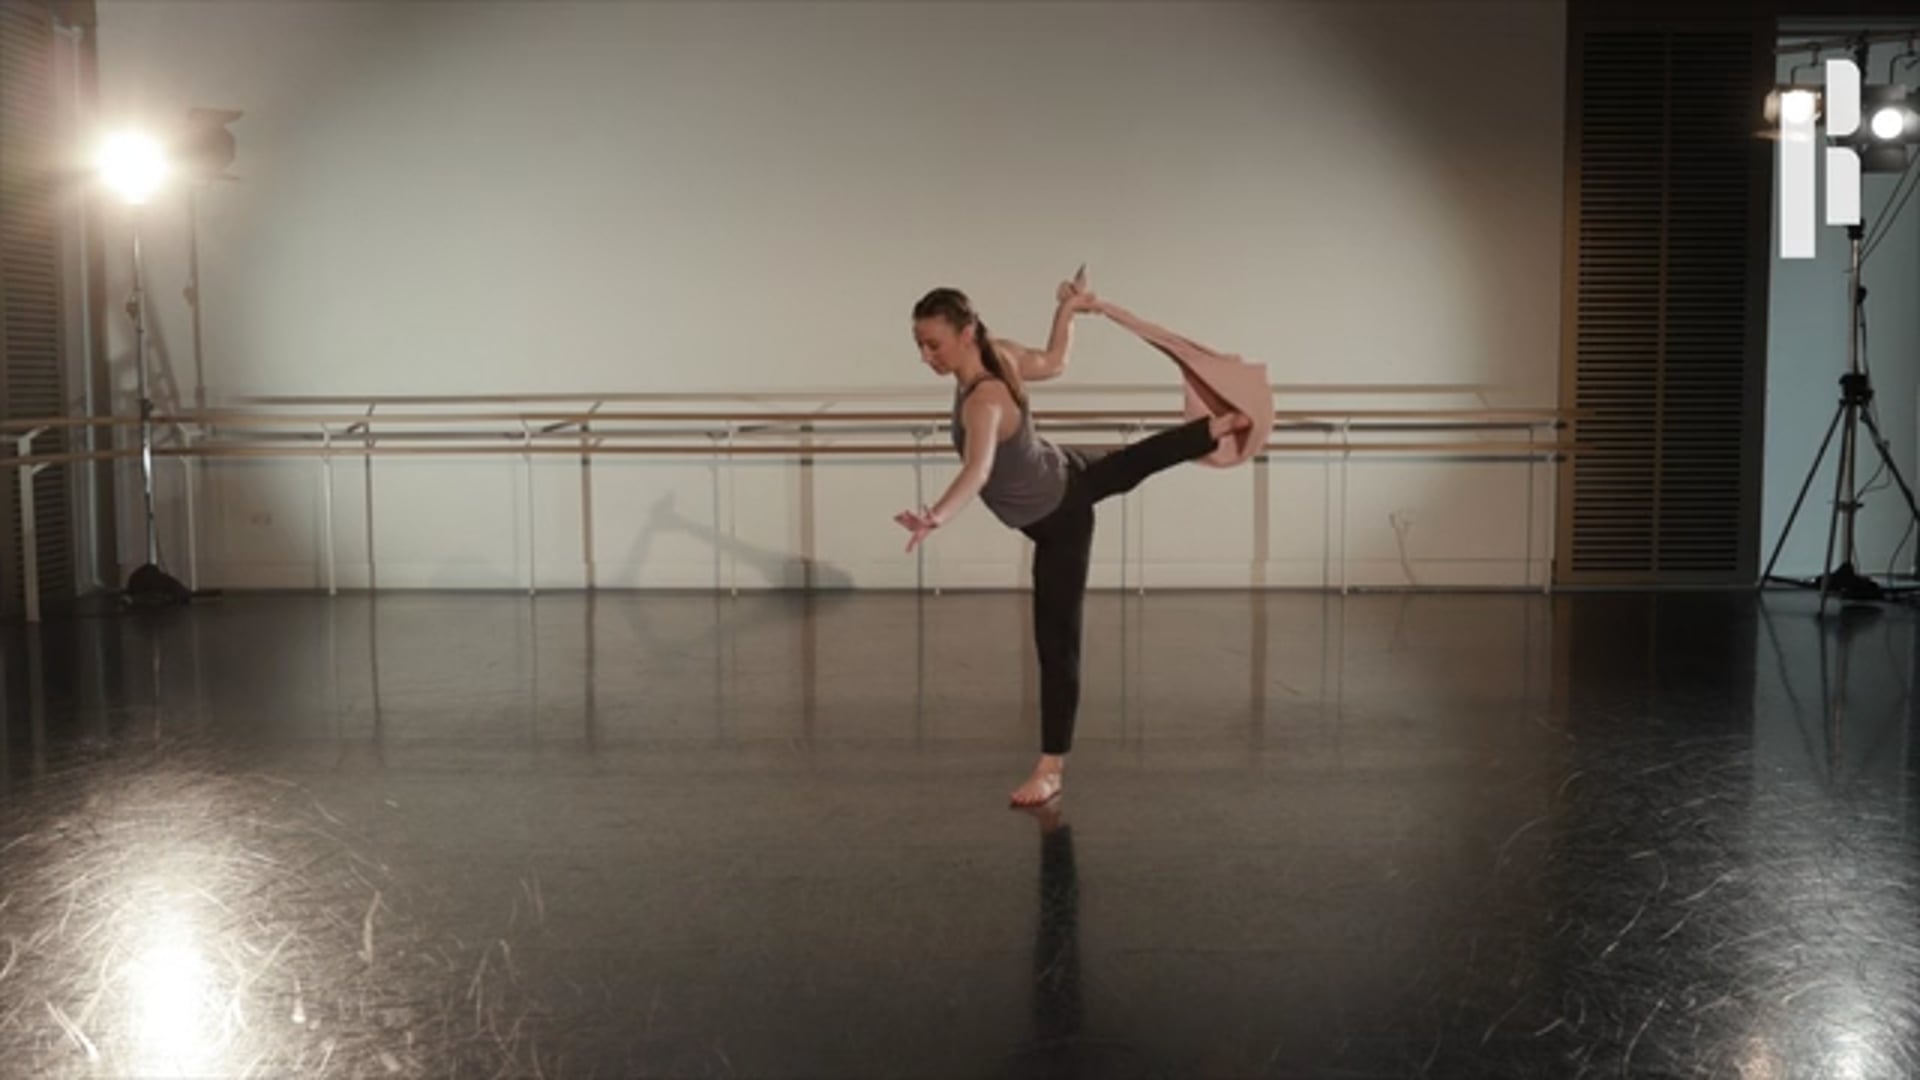 A young dancer is doing a pose in a dance studio.